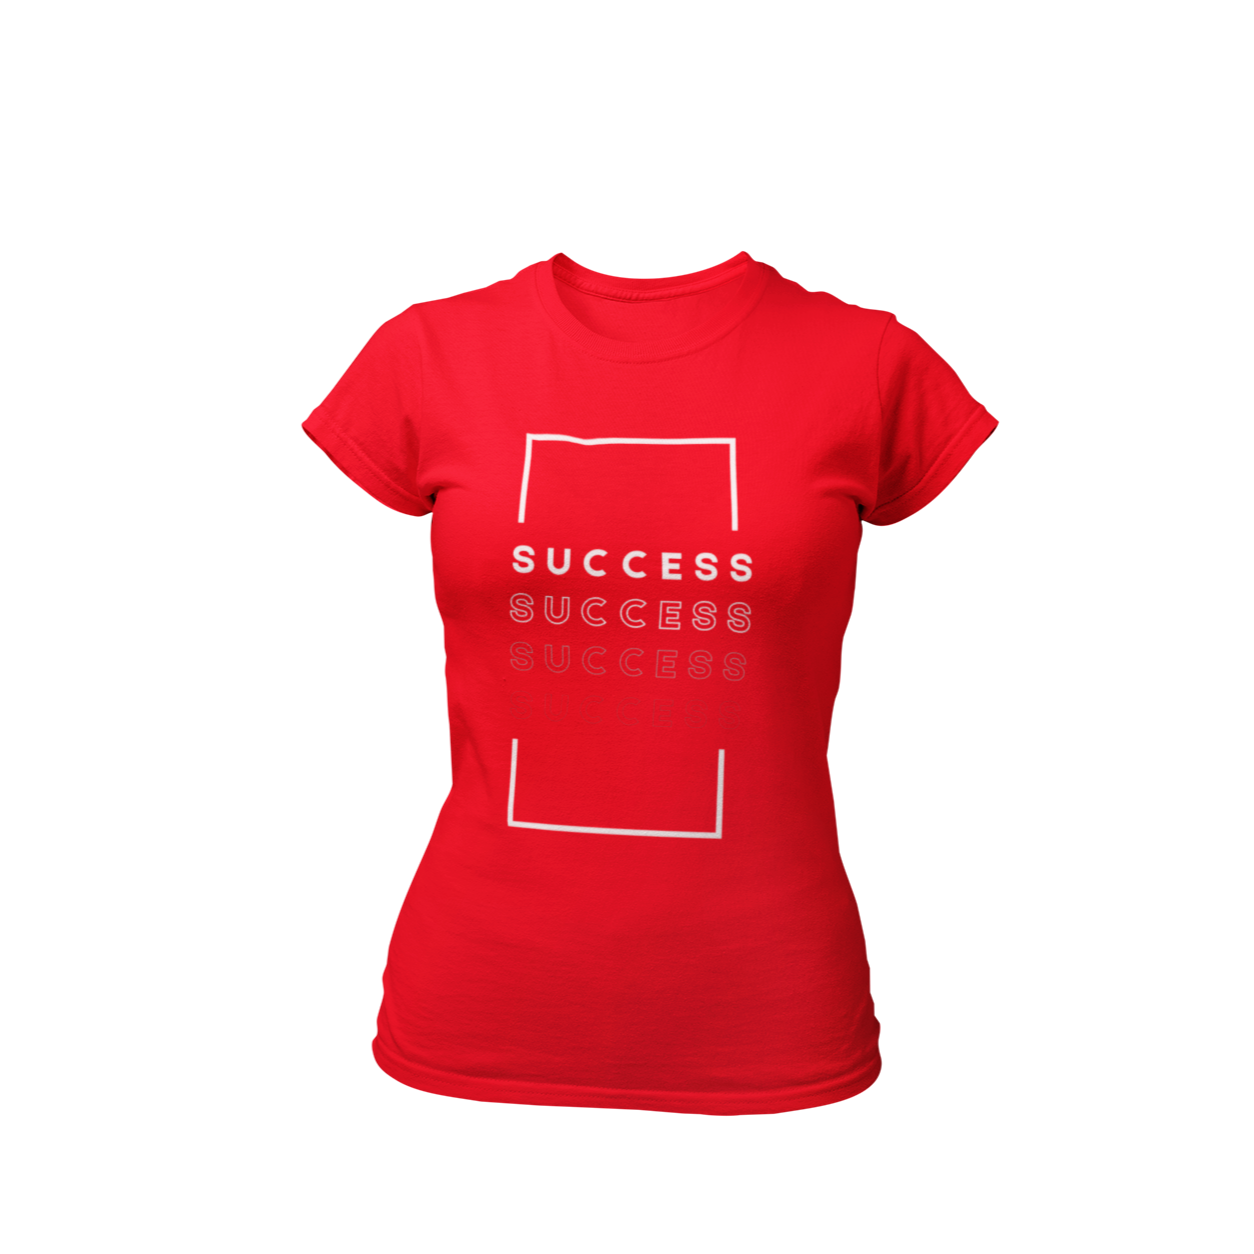 Red Women's Layered Success Shirt by Made Inc 